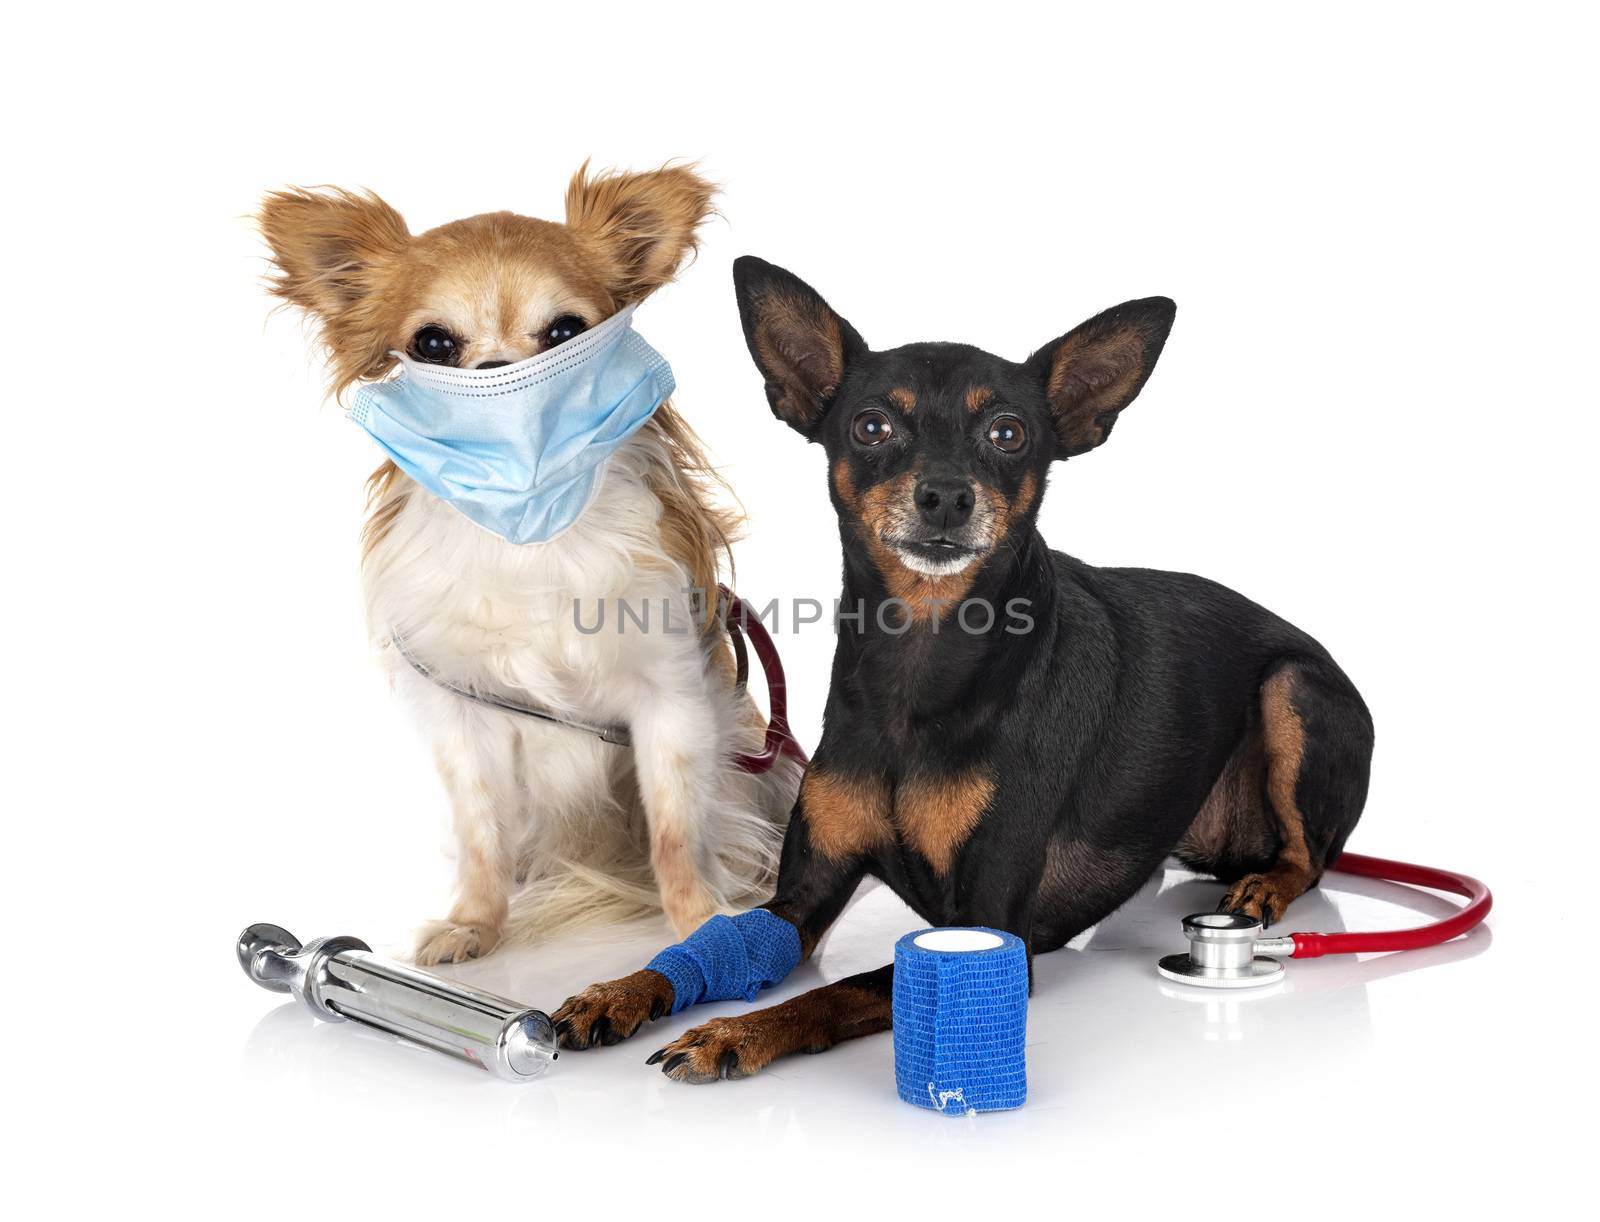 miniature pinscher and chihuahua  in front of white background